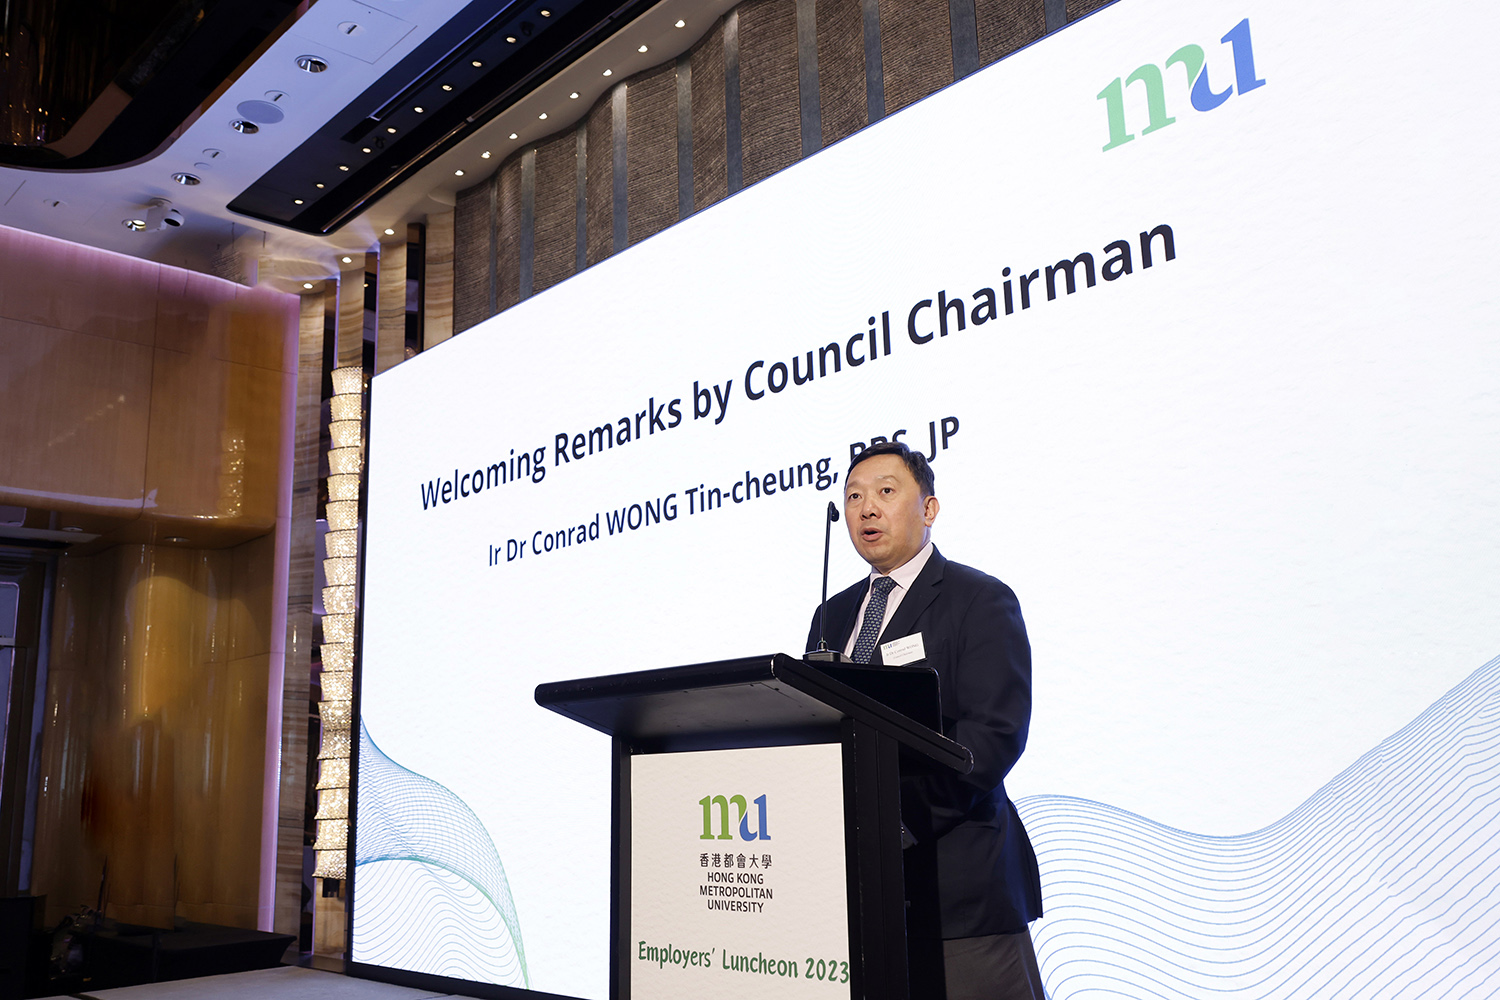 HKMU Council Chairman Ir Dr Conrad Wong Tin-cheung remarks that the extension of the Government